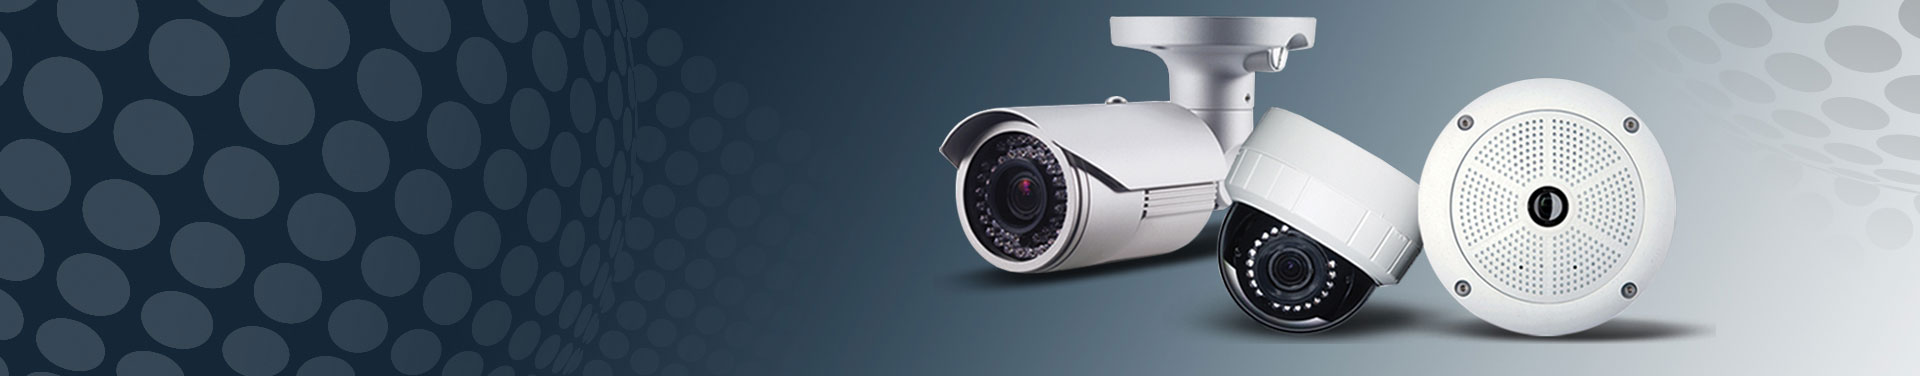 product_cctv_banner-21111